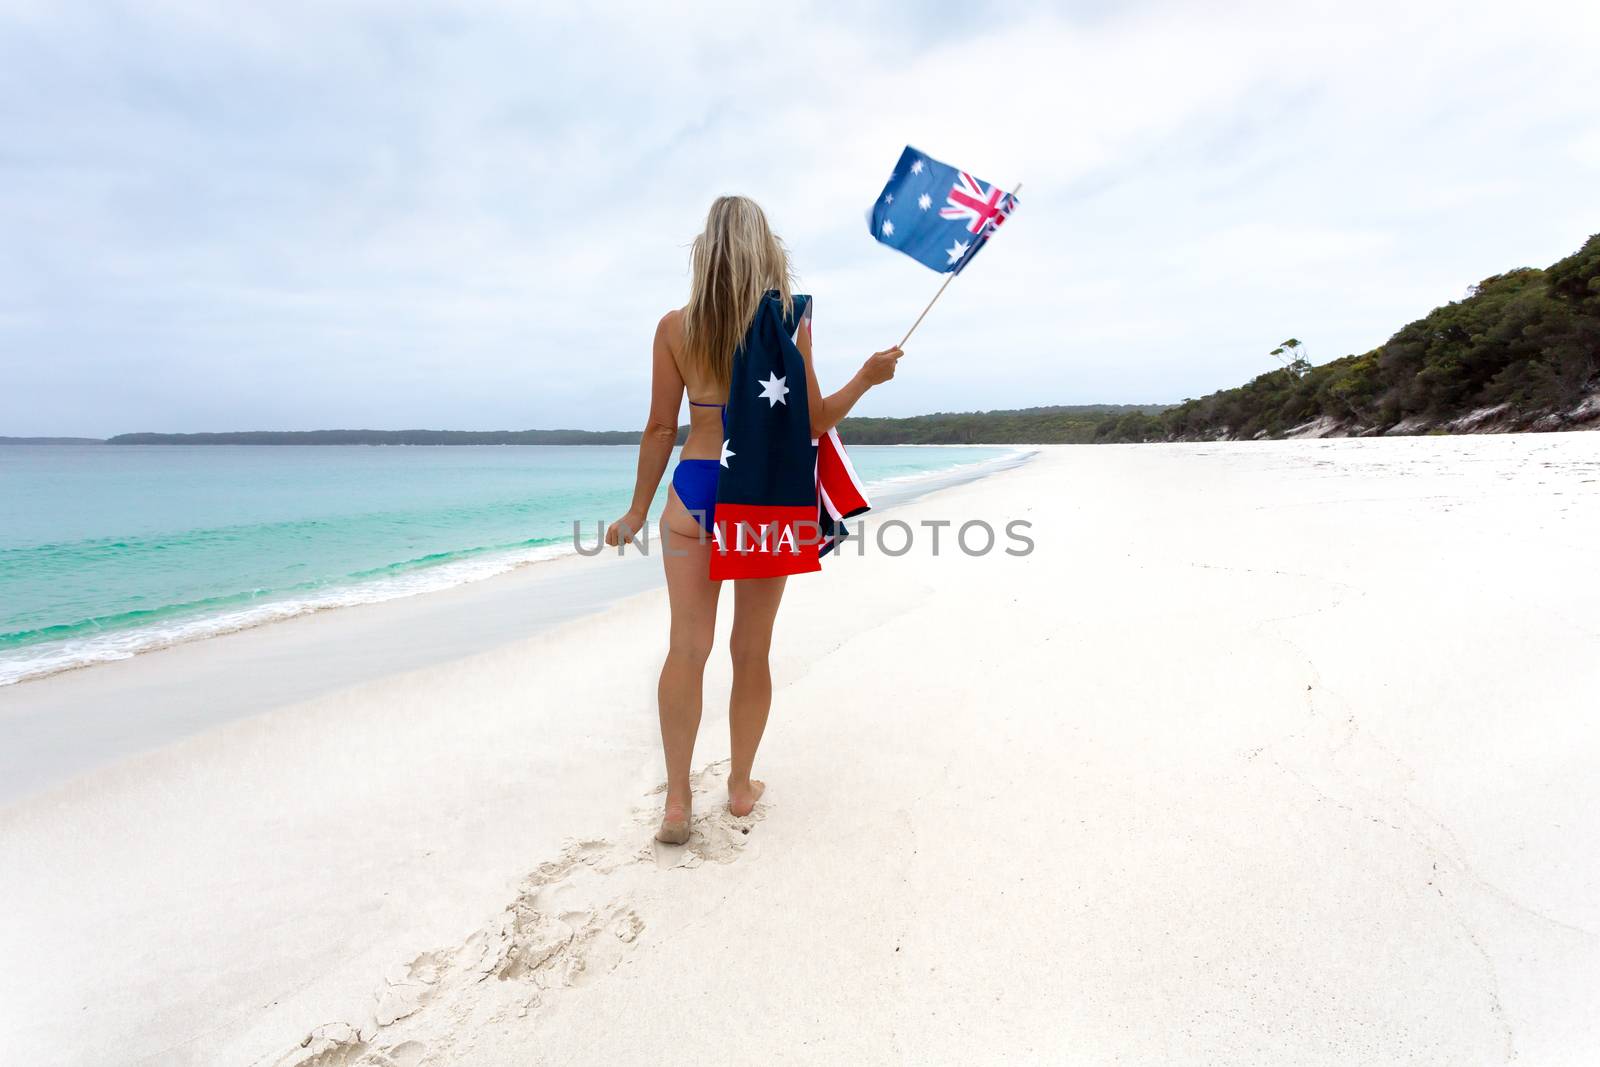 Aussie blonde woman walking along an idyllic beach wearing a bikini with patriotic Australian flag towel draped across one shoulder. She is also holding a small  flag.  Australian travel, Australia day, holiday, vacation.  Space for copy.